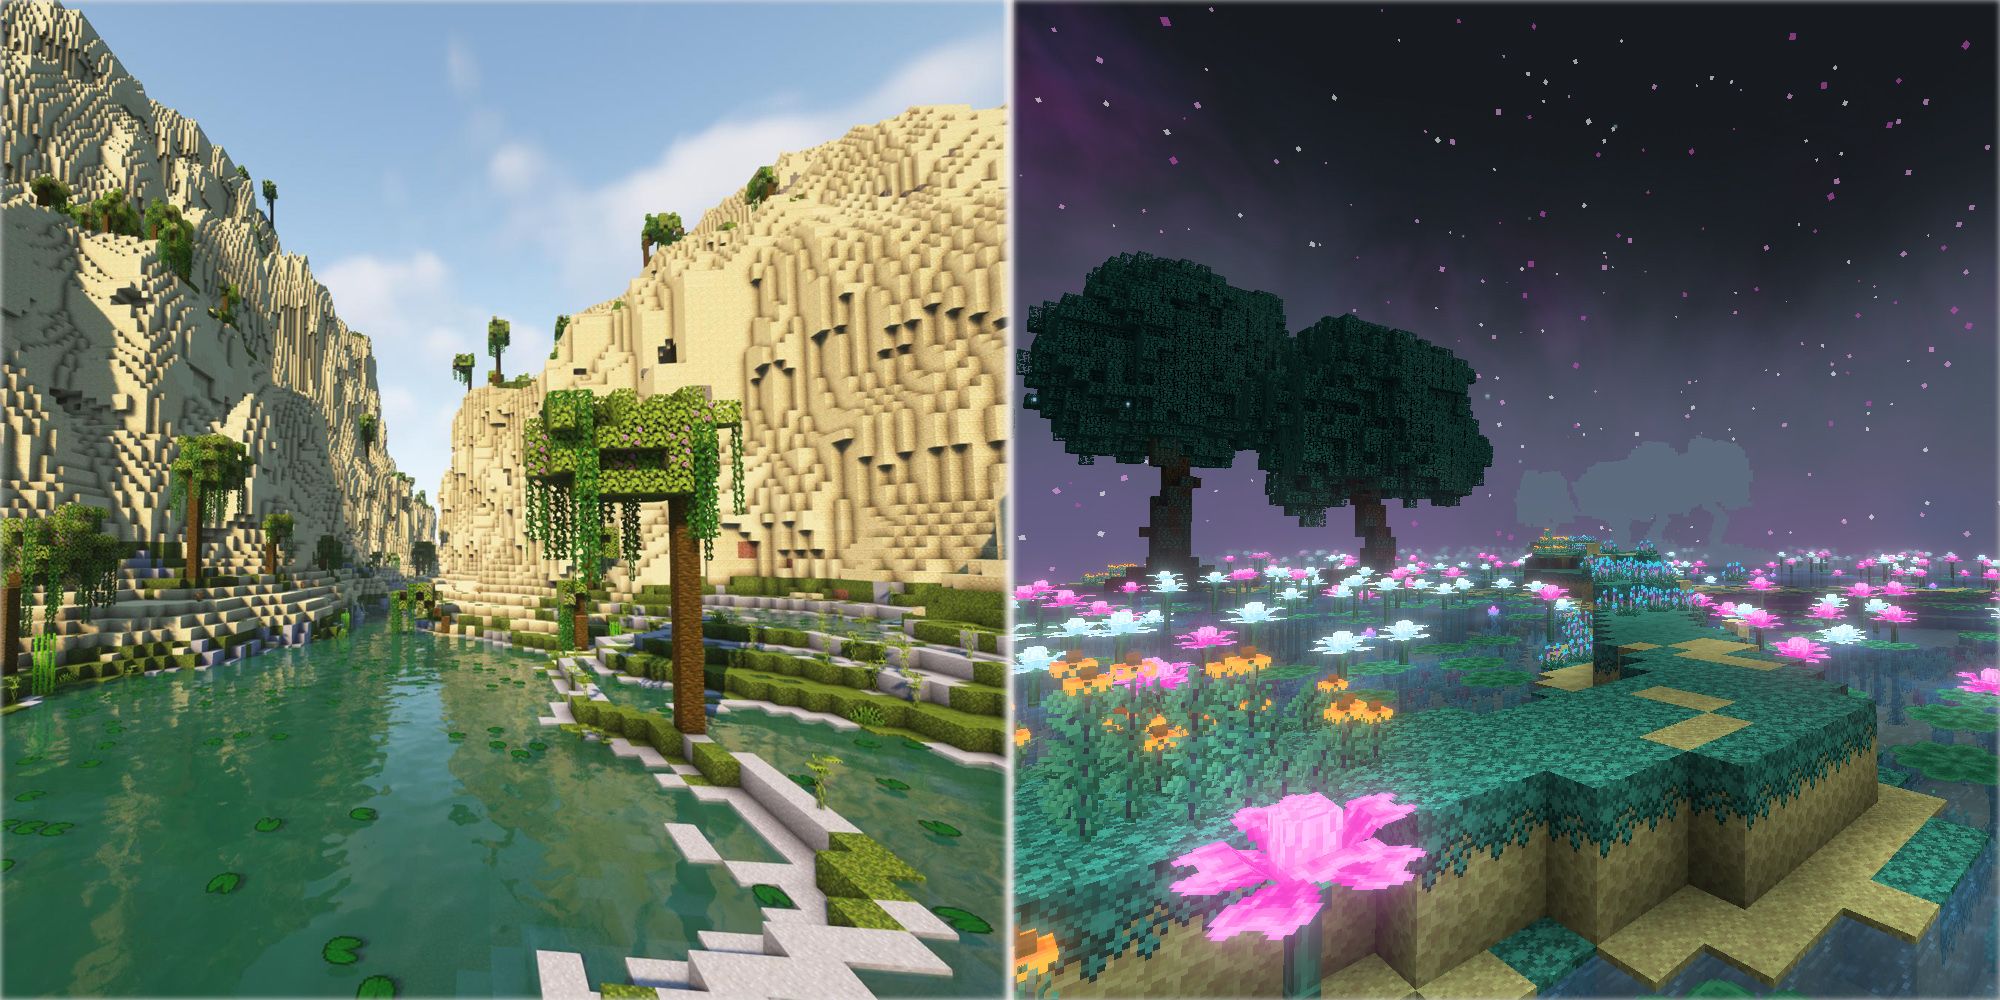 Mini Mod Reviews - Oh The Biomes You'll Go #mcyt#minecraft#minecraftme